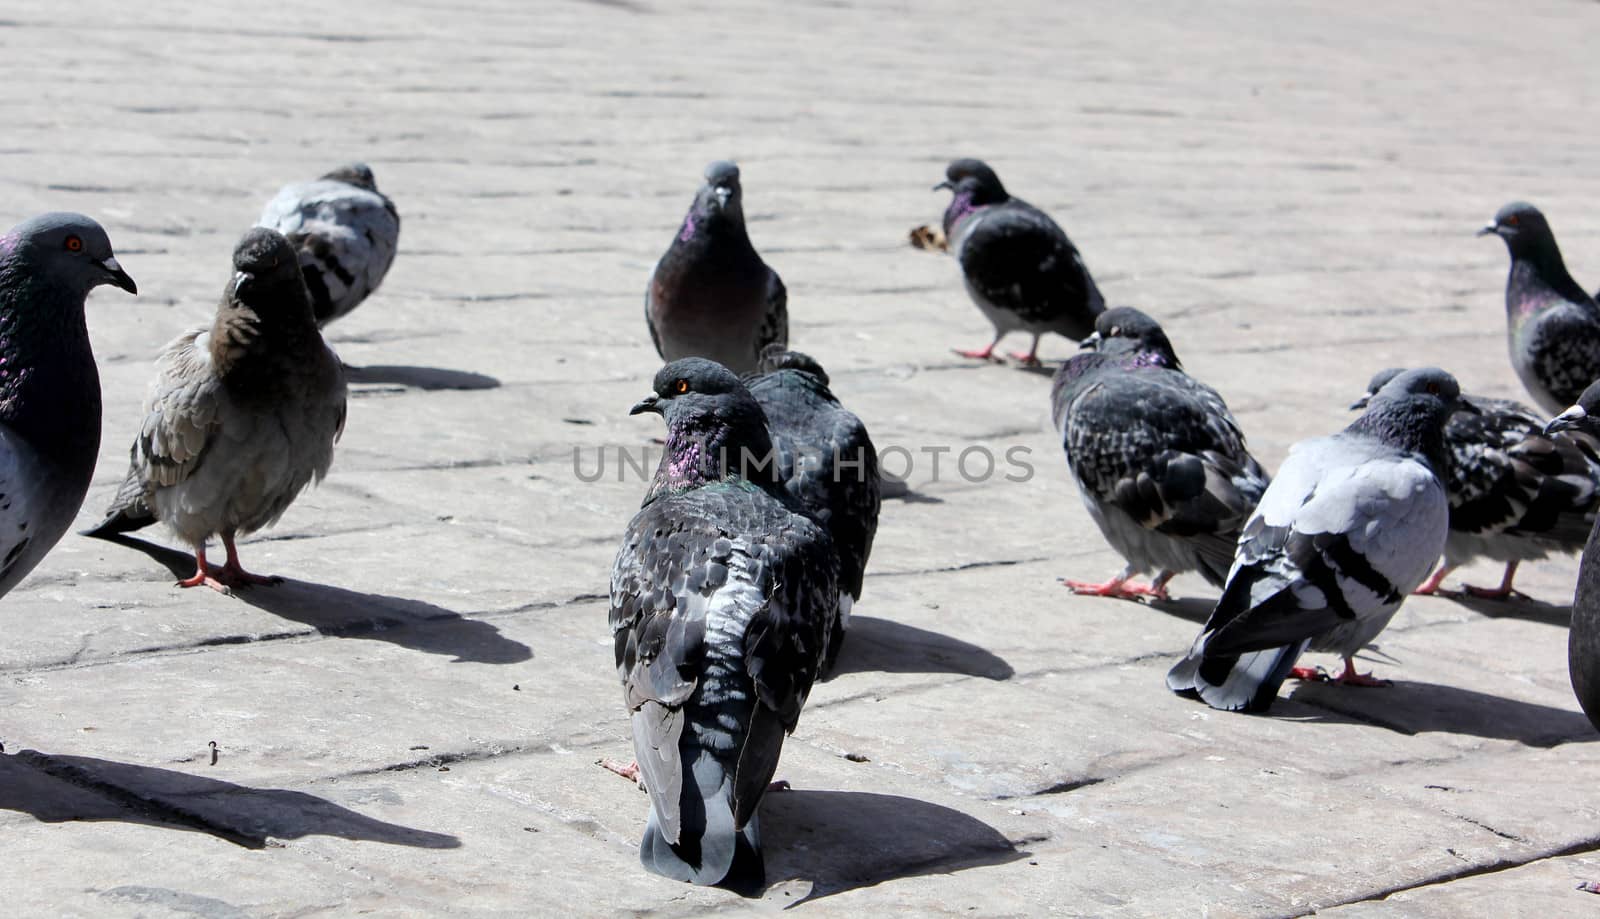 A flock of pigeons standing in a public square in the city, hoping to be fed.